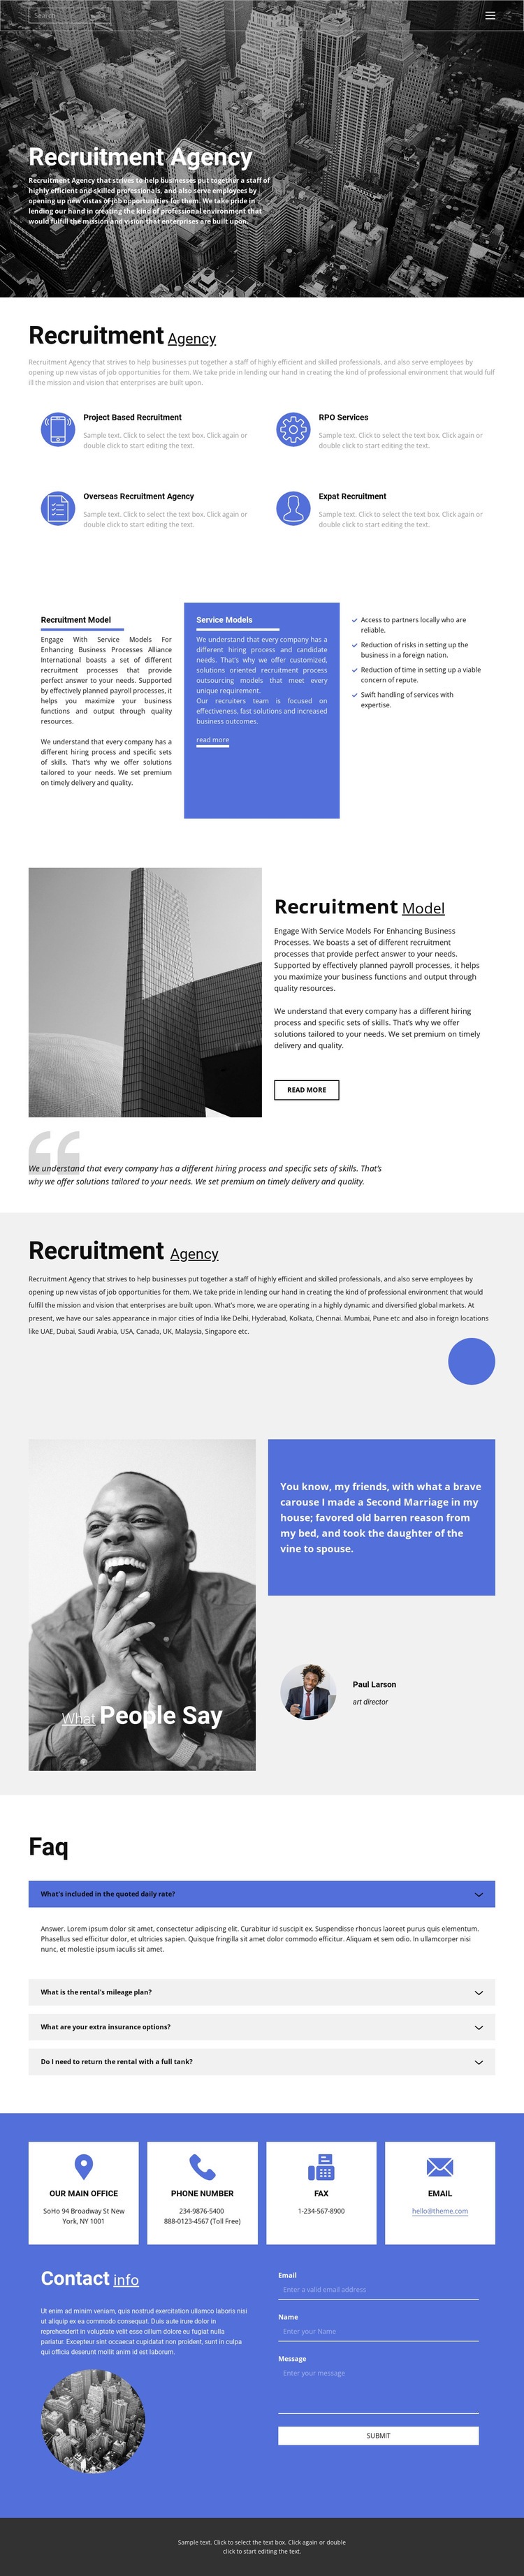 Recruiting agency with good experience Webflow Template Alternative